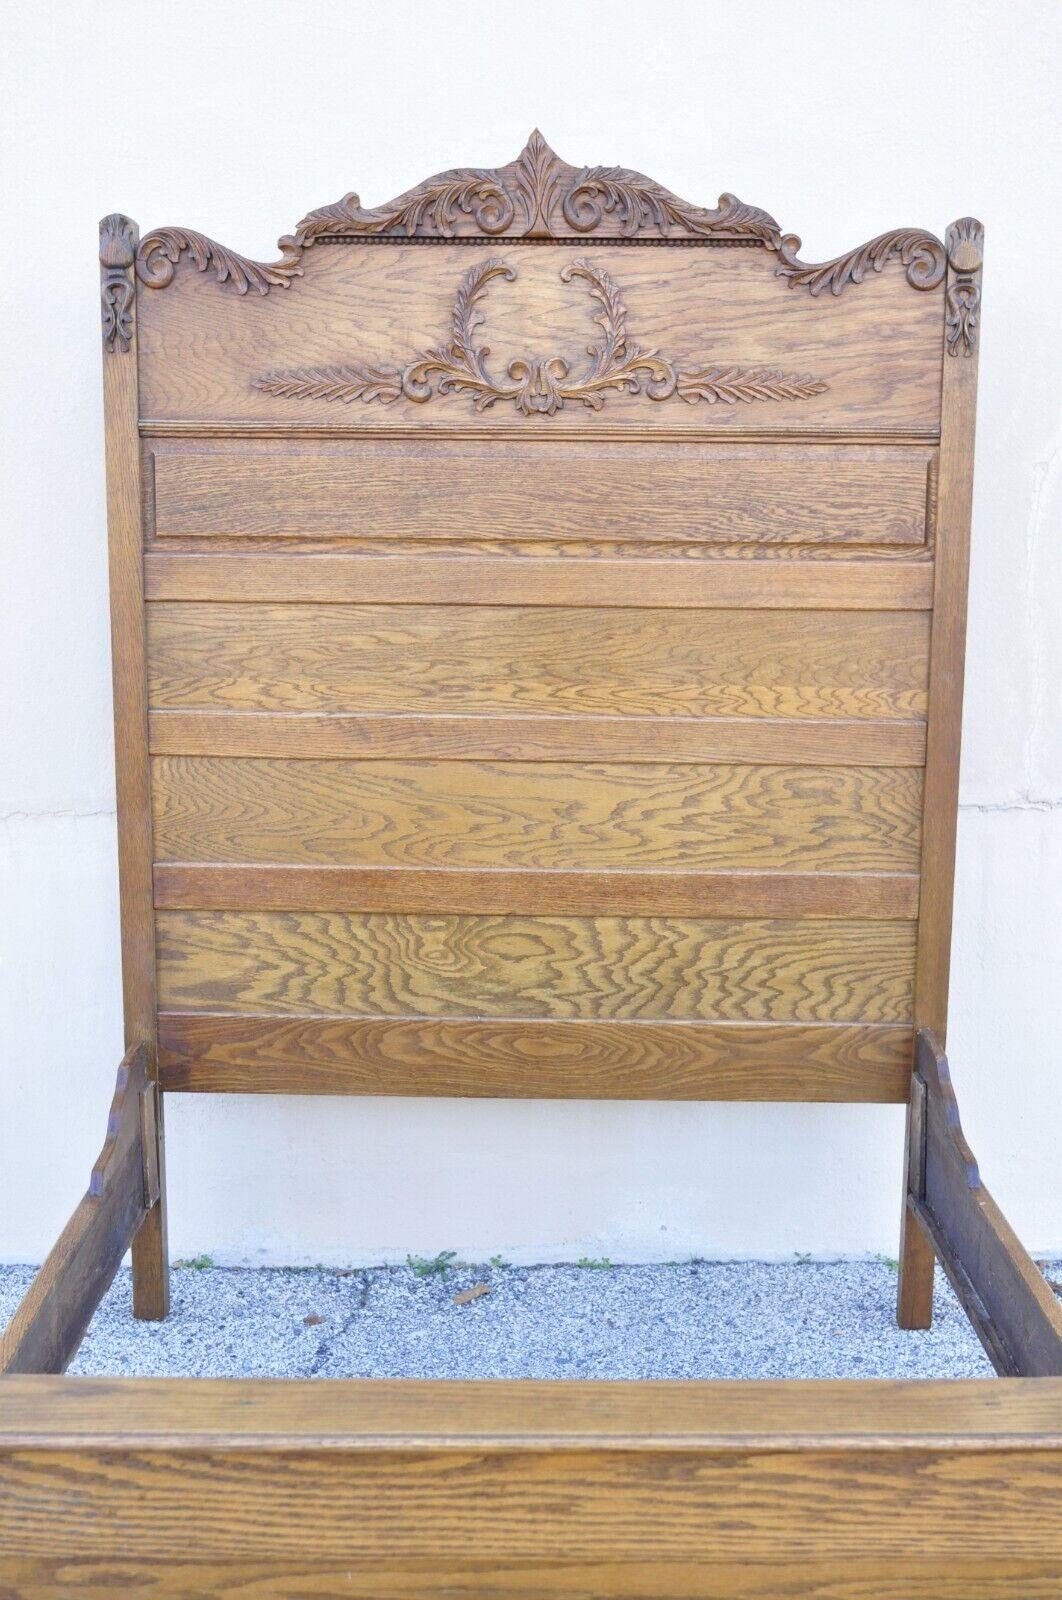 Antique Eastlake Victorian Oak Wood Tall Headboard Full Size Bed Frame In Good Condition For Sale In Philadelphia, PA